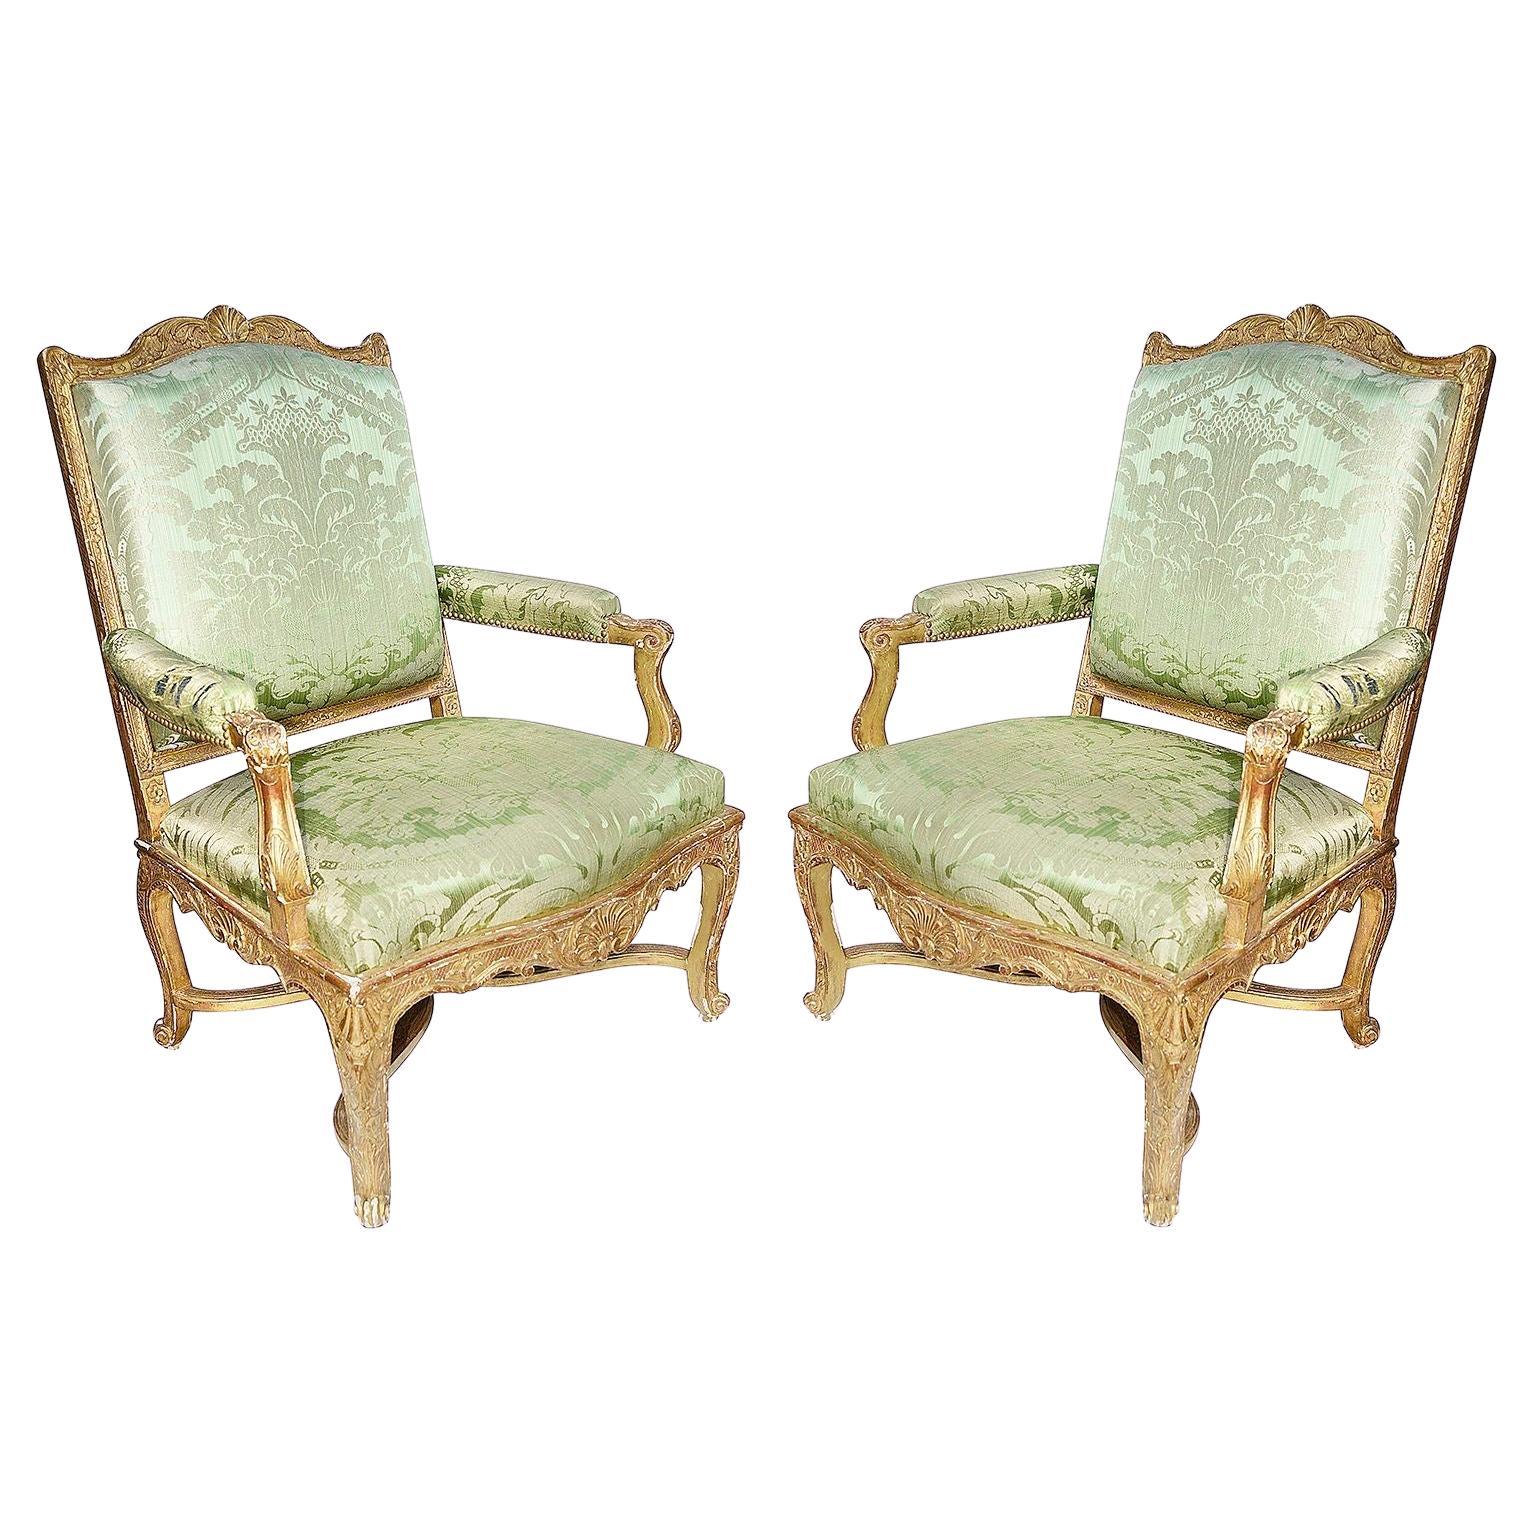 Pair 19th Century French Giltwood Salon Chairs